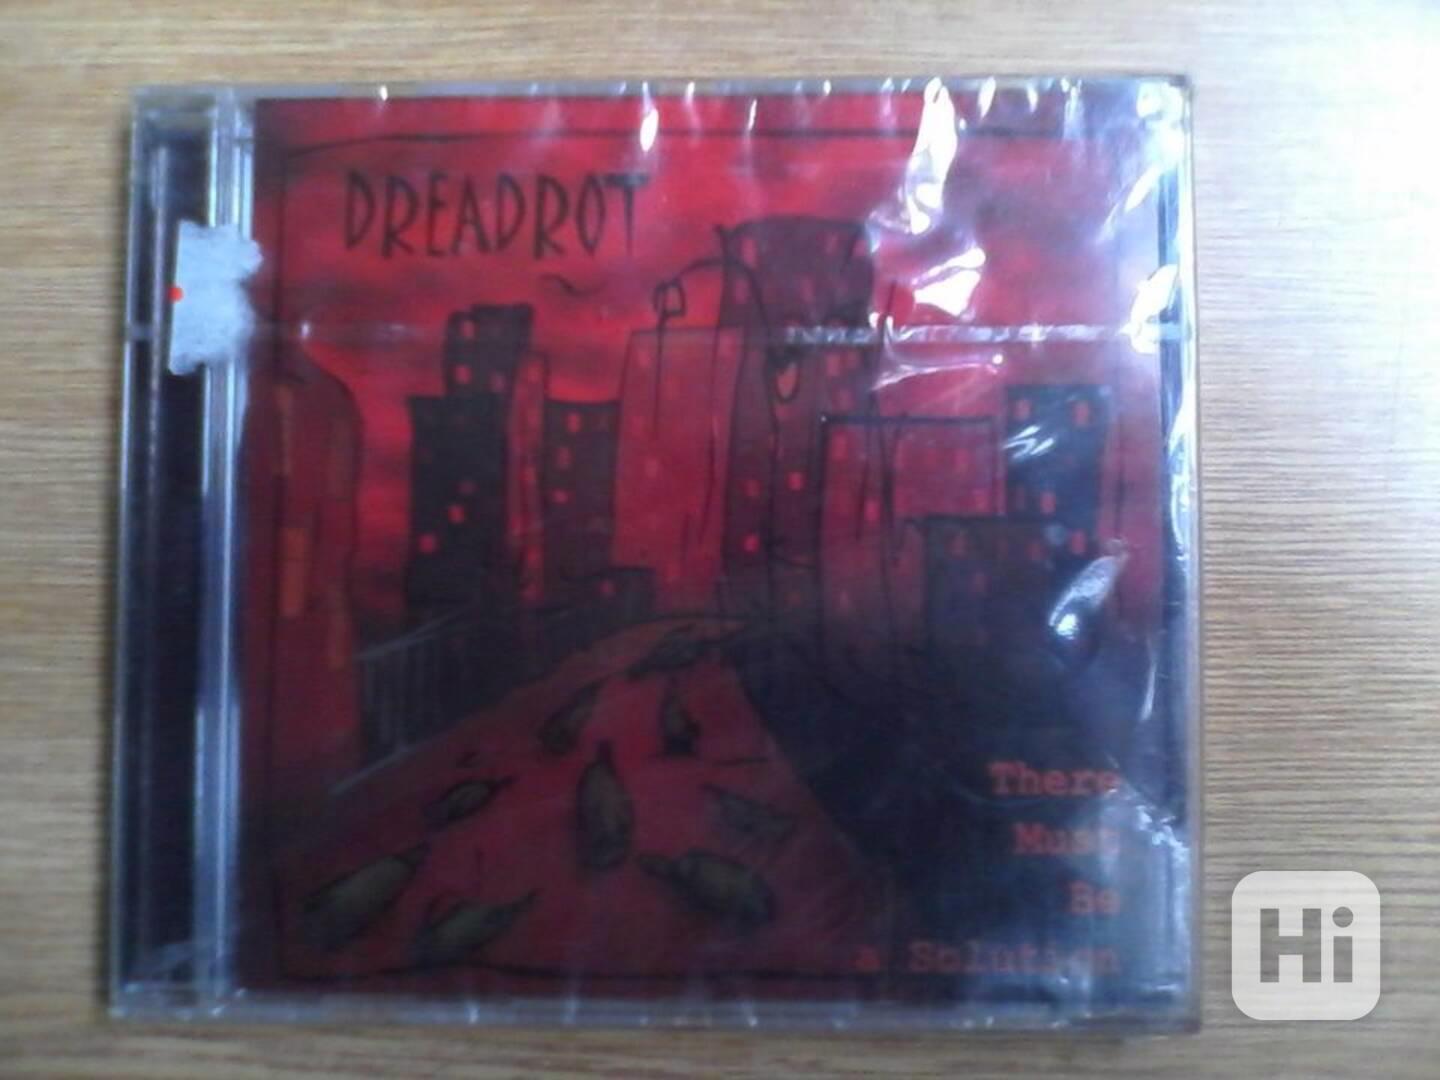 Dreadrot ‎– There Must Be a Solution ( CD )